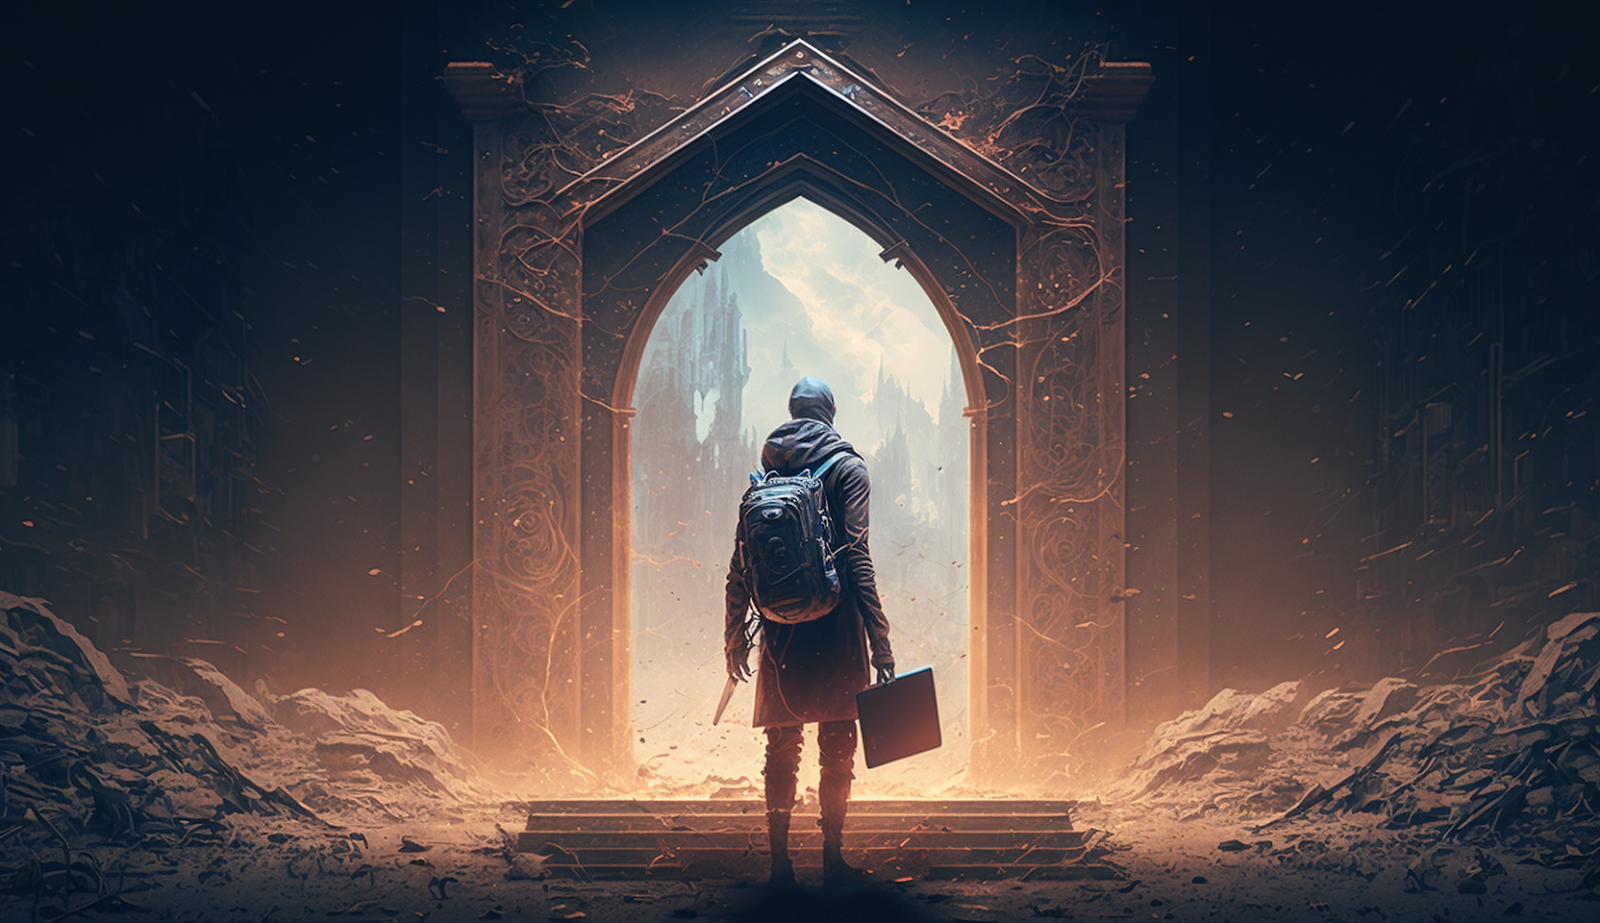 A heroic image of a weary developer standing at the gates of time with a laptop in hand 16:9